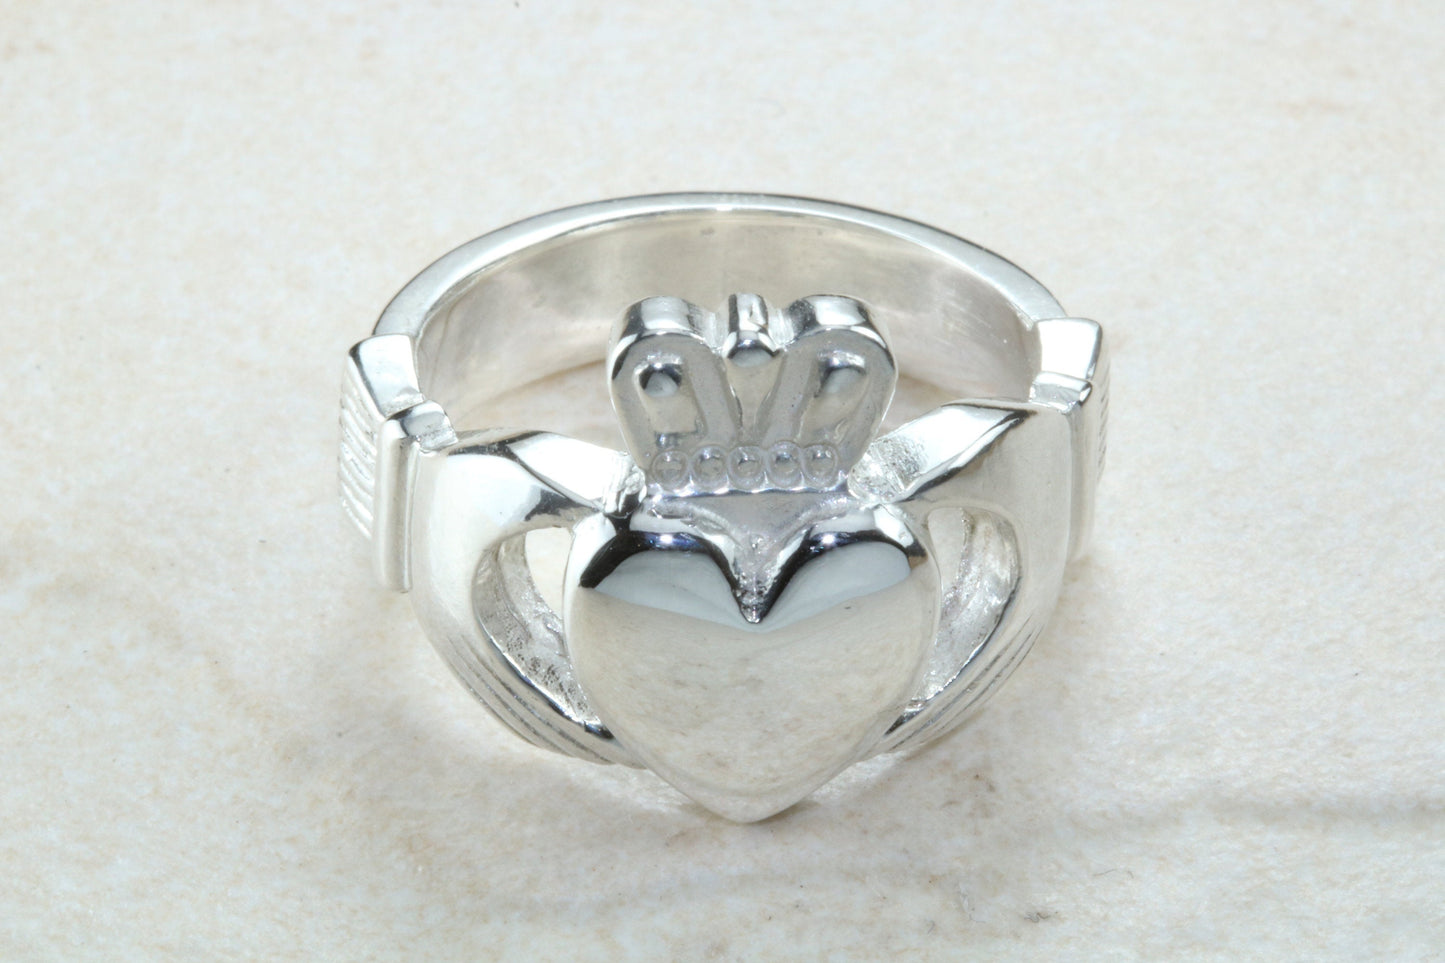 Very large and very very heavy Claddagh ring, solid silver, for ladies or gents. Available in silver, yellow gold, white gold and platinum